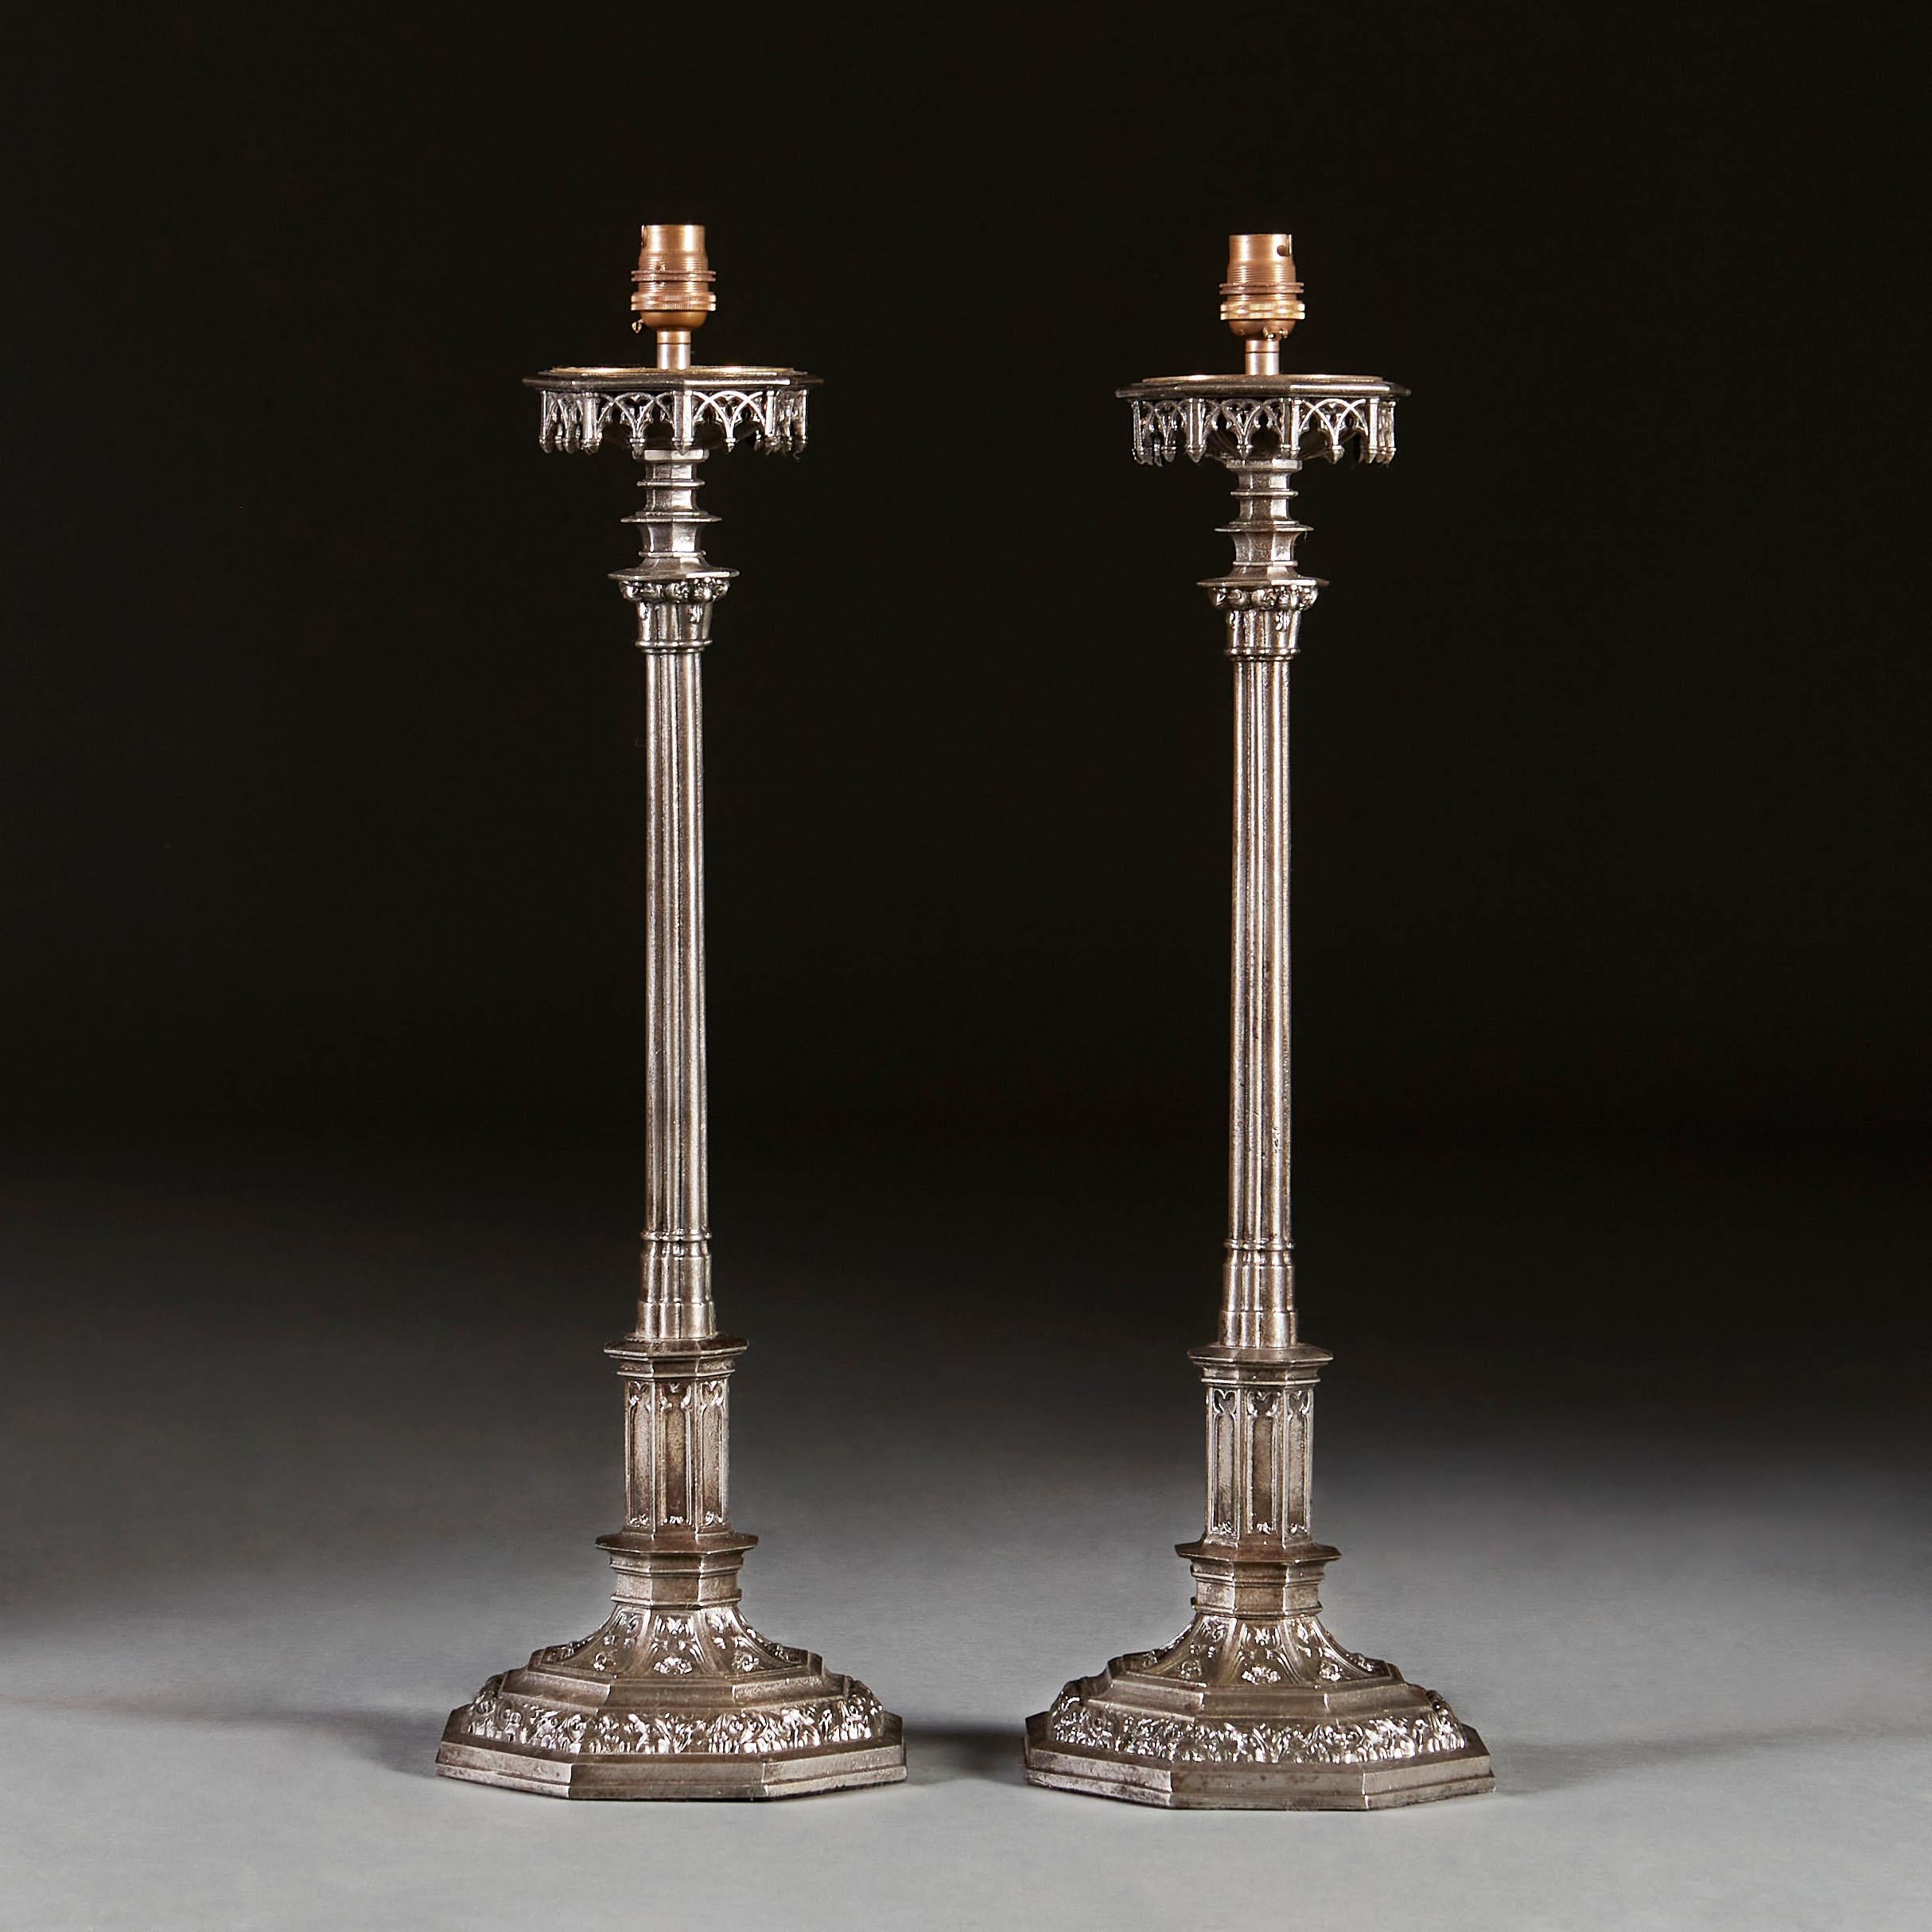 A pair of nineteenth century polished steel candlestick lamps in the Gothic taste, with finely cast octagonal bases, after Augustus Welby Northmore Pugin.

Please note that the lamps are currently wired for the UK, and that the lampshade is not